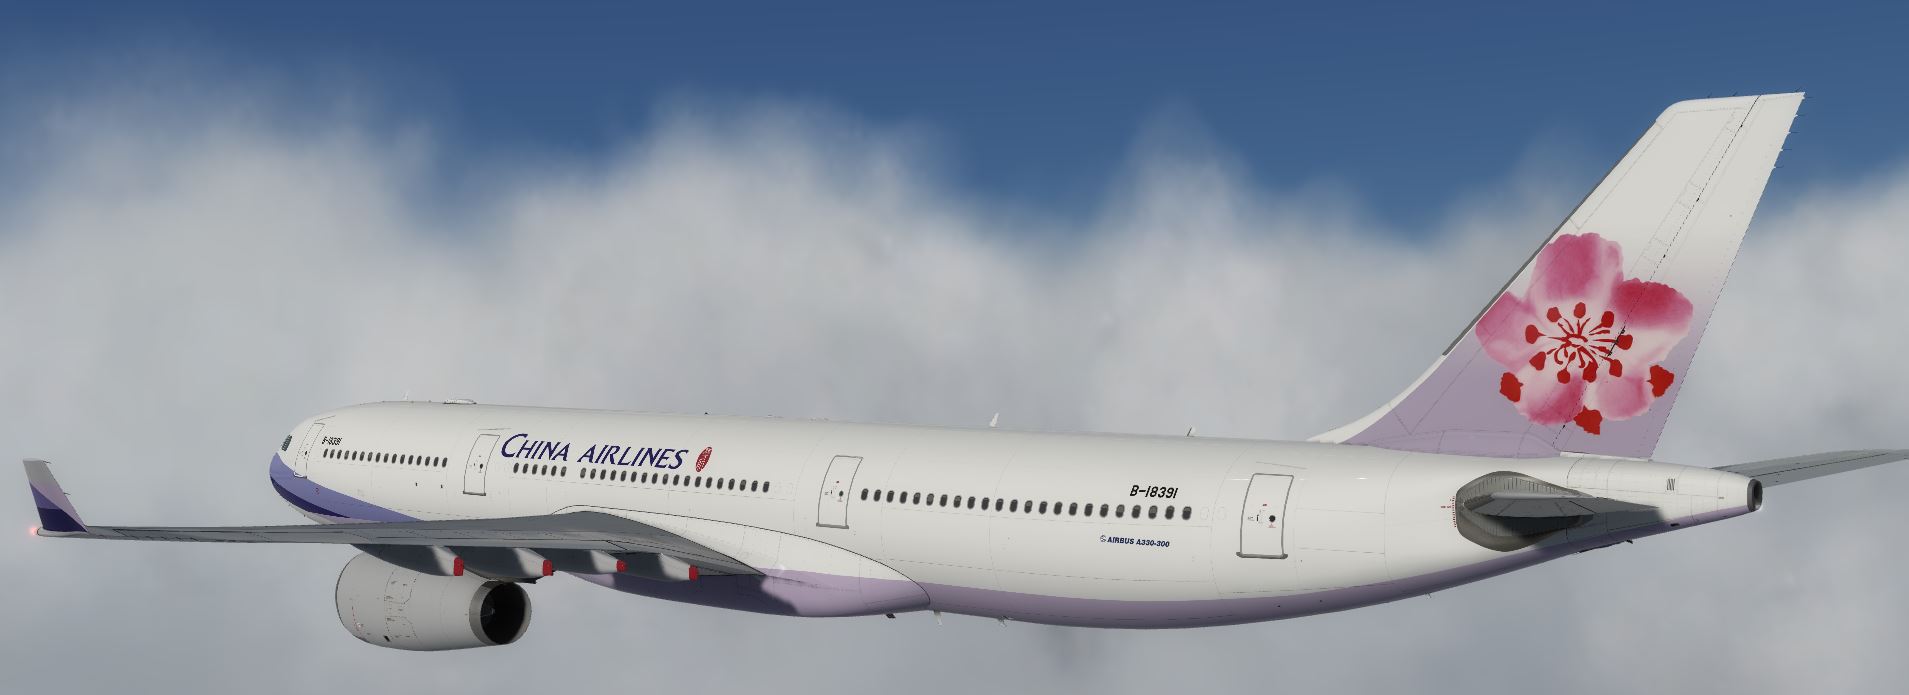 AS A330 ChinaAirline-6099 